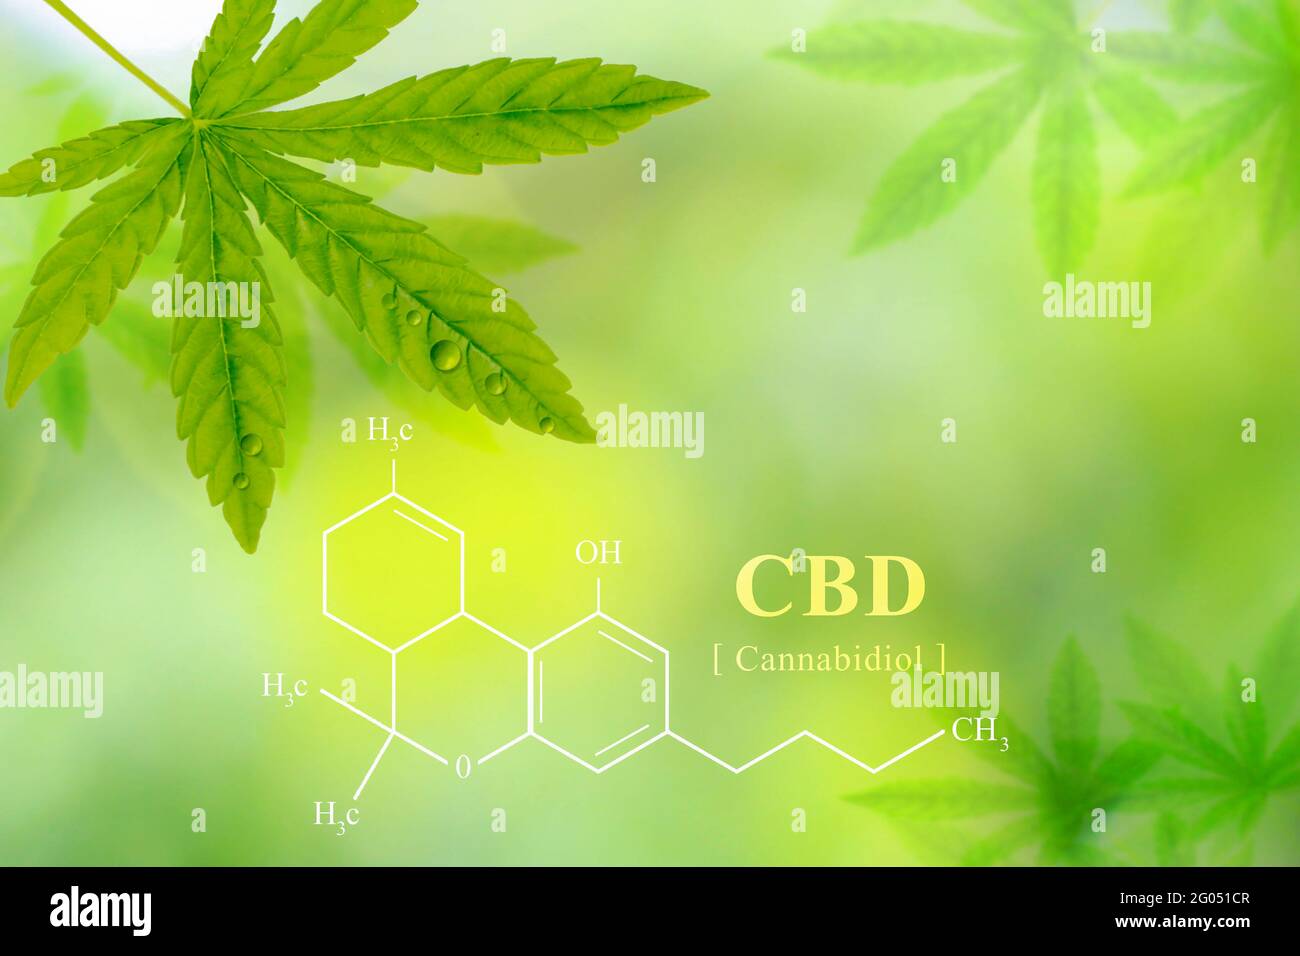 Cannabis for background or wallpaper. Chemical formula Cannabidiol (CBD) develops premium cannabis and cannabis products for medical purposes. Stock Photo